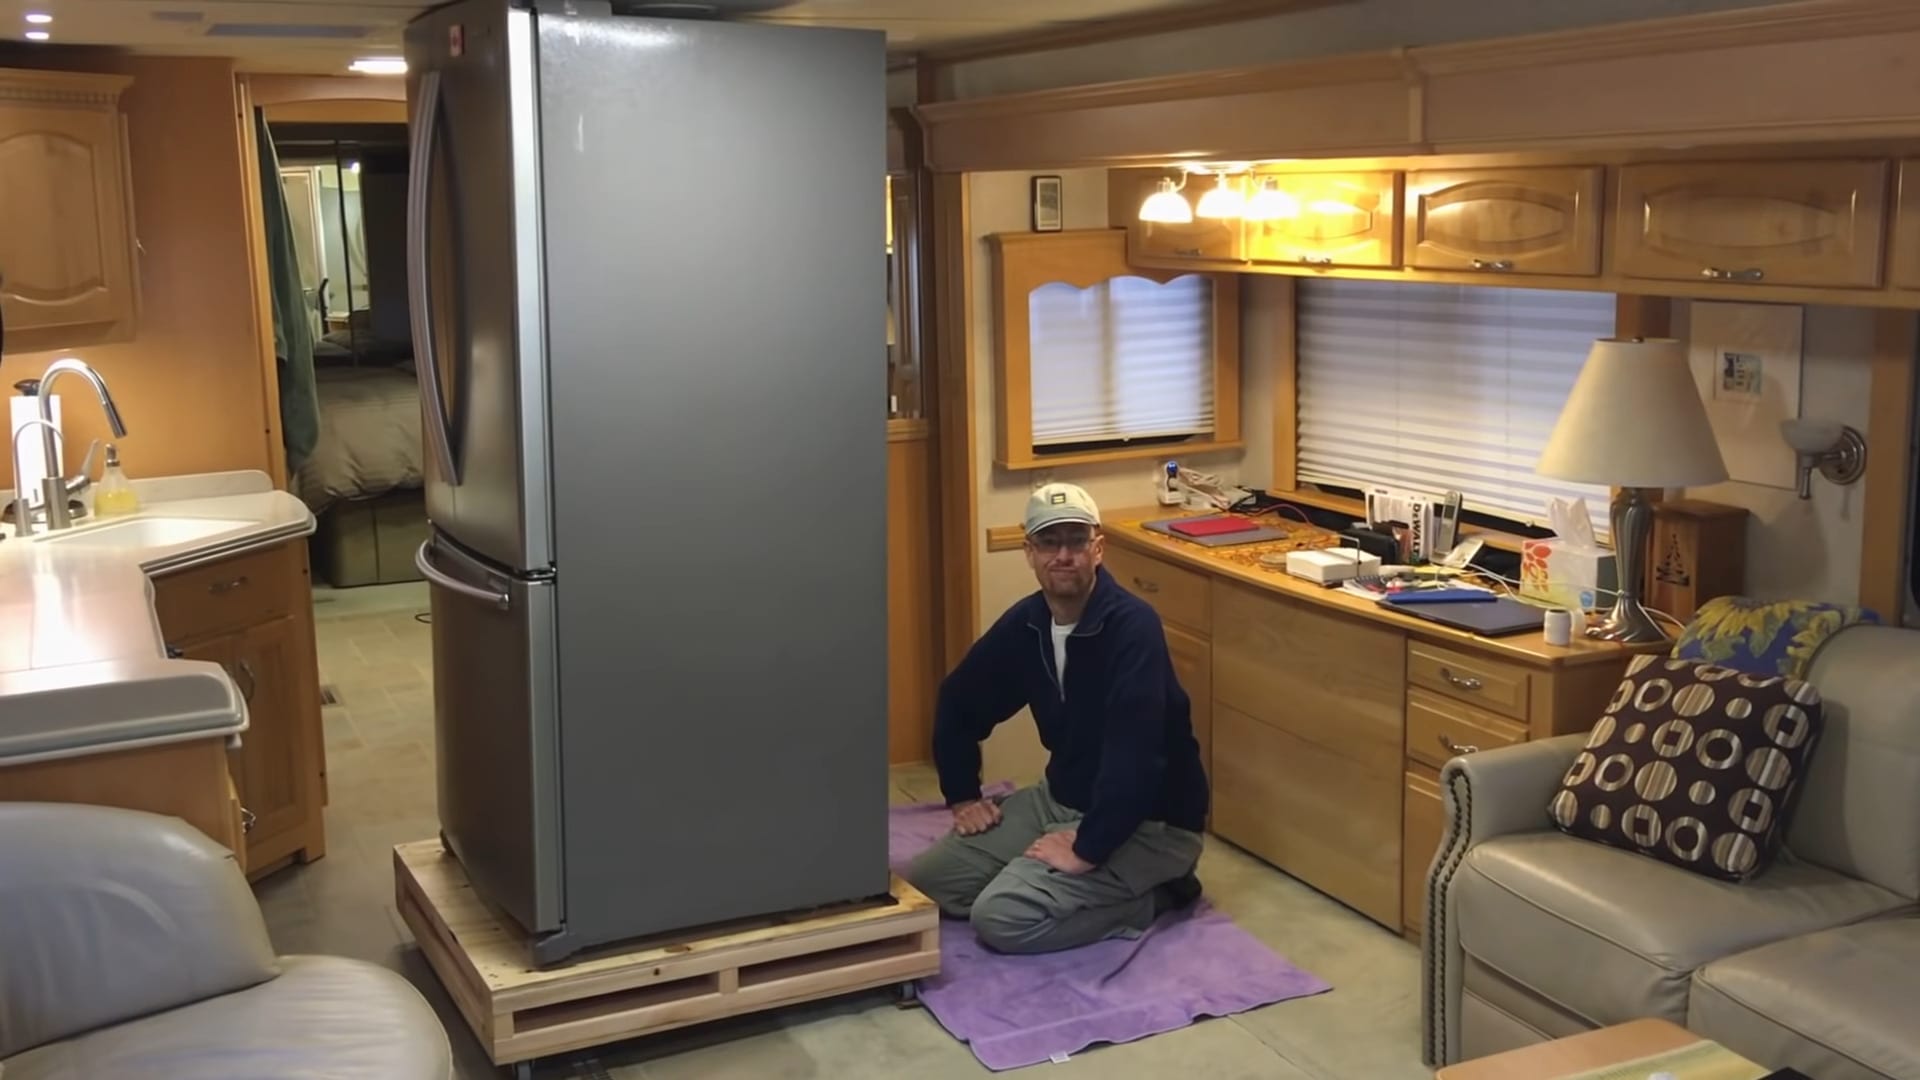 RV residential refrigerators sometimes require repair or replacement.